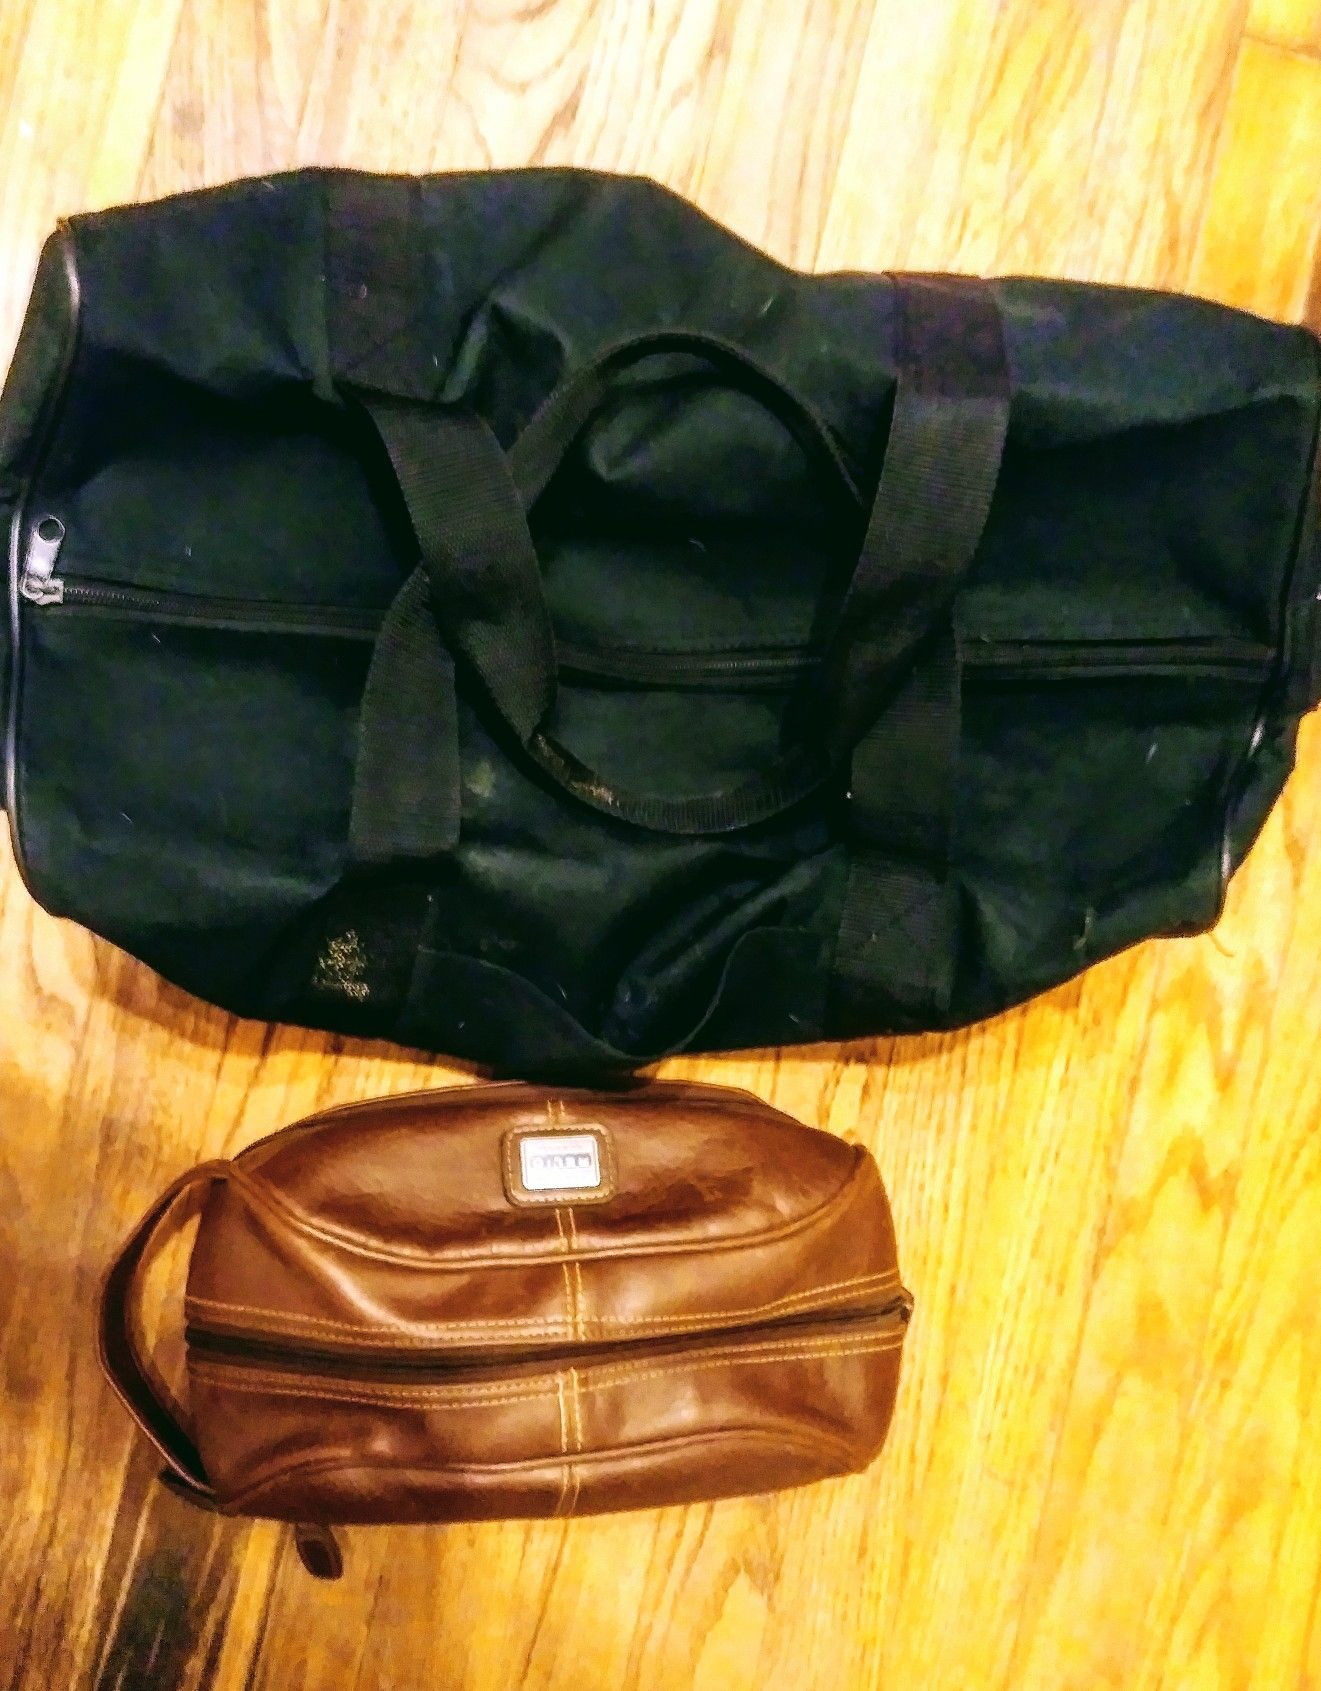 Men's large black duffle bag and men's brown leather personal items travel bag